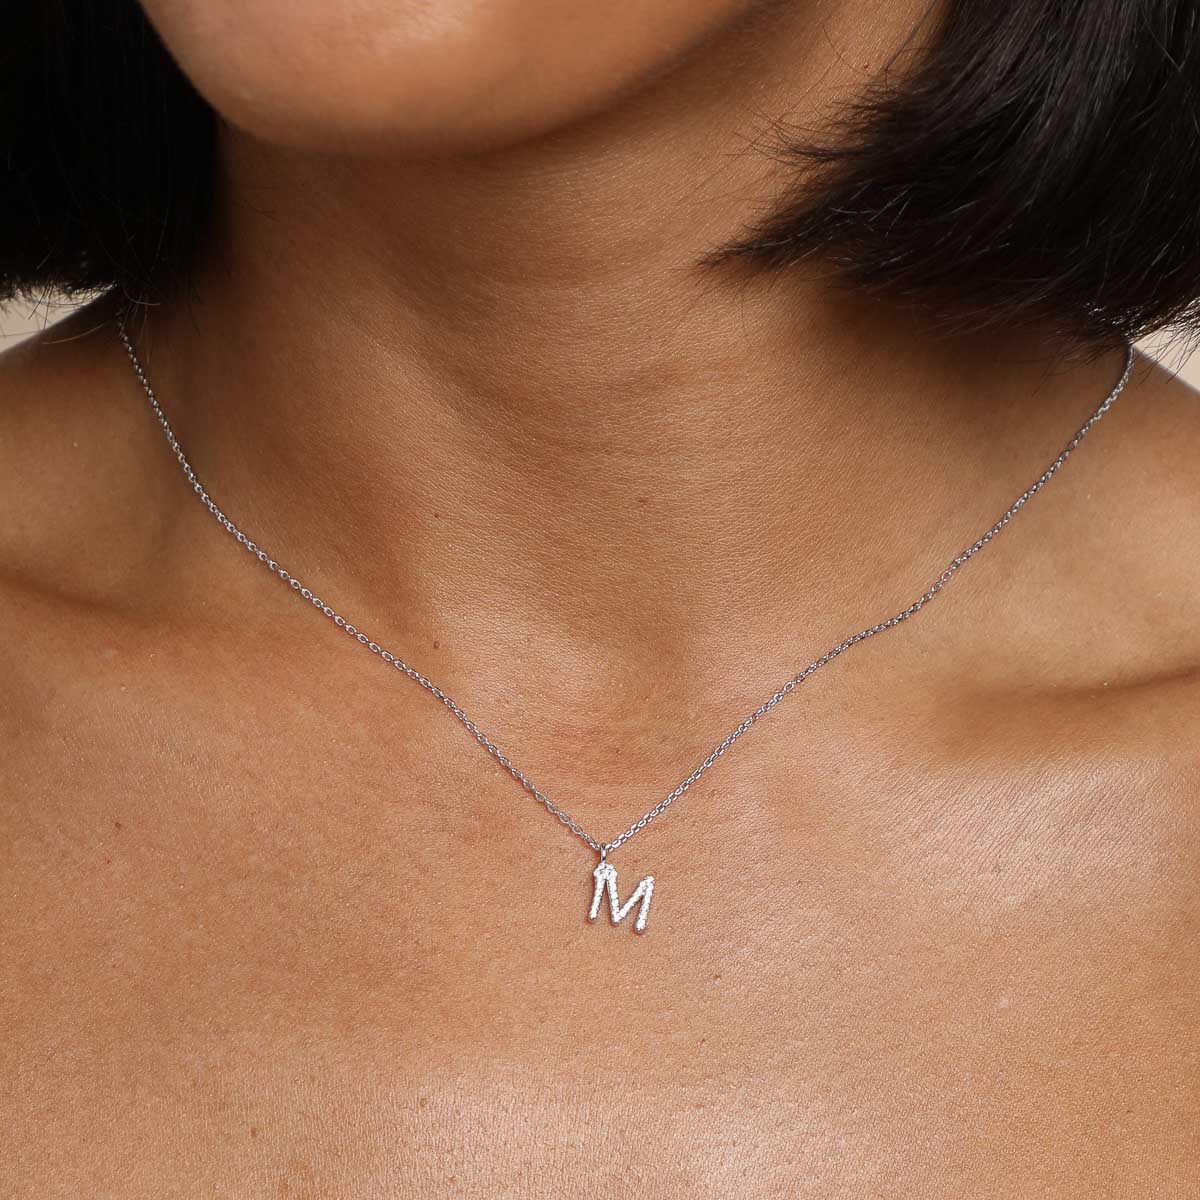 Women Fashion Link Chain Necklace Birthday Gift Personalized Letter Pendant  Platinum/18K Gold Plated Cubic Zirconia Inlaid Initial Necklace (Letter M)  | Wish | Letter pendants, Hot necklaces, Letter jewelry